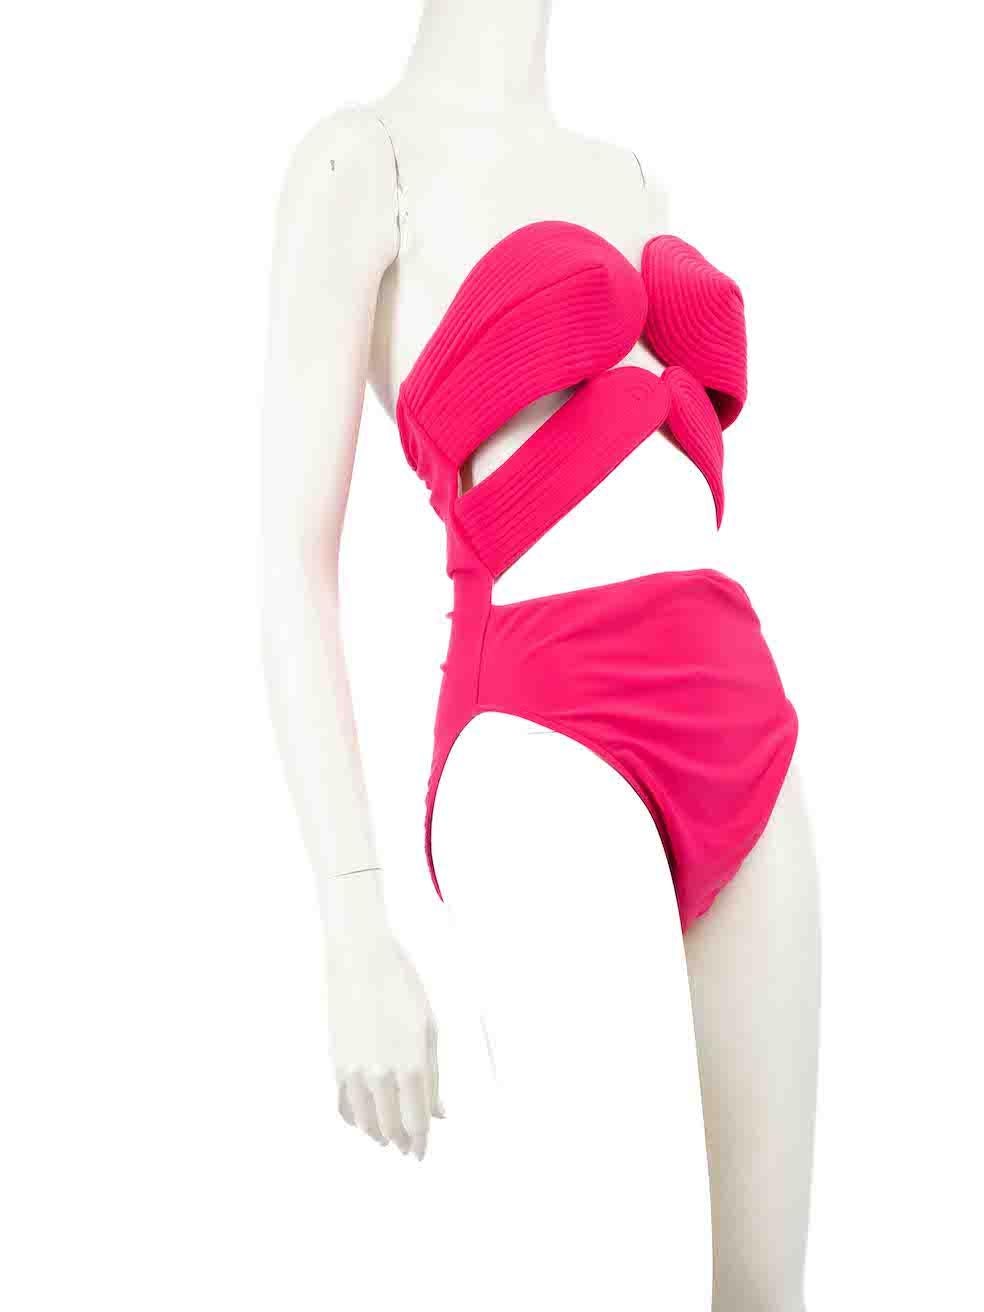 CONDITION is Never worn, with tags. No visible wear to swimsuit is evident. However due to poor storage, the front left side and lining has small pull to weave. A tiny white mark is seen on the centre front of this new Adriana Degreas designer